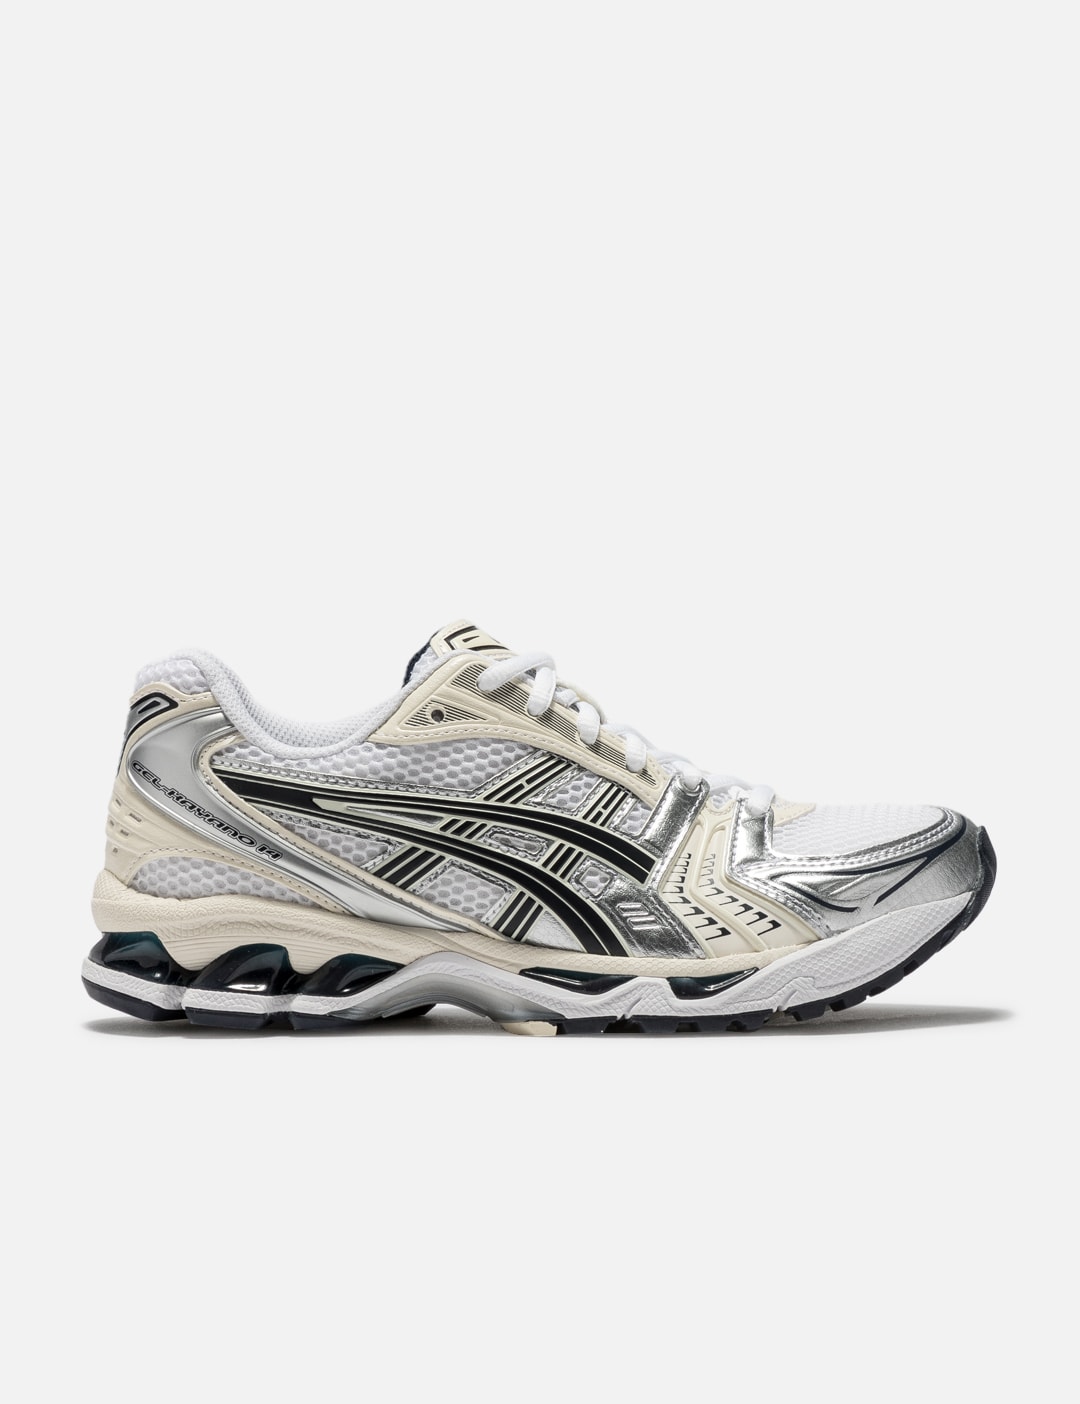 Asics - GEL-KAYANO 14 | HBX - Globally Curated Fashion and Lifestyle by ...